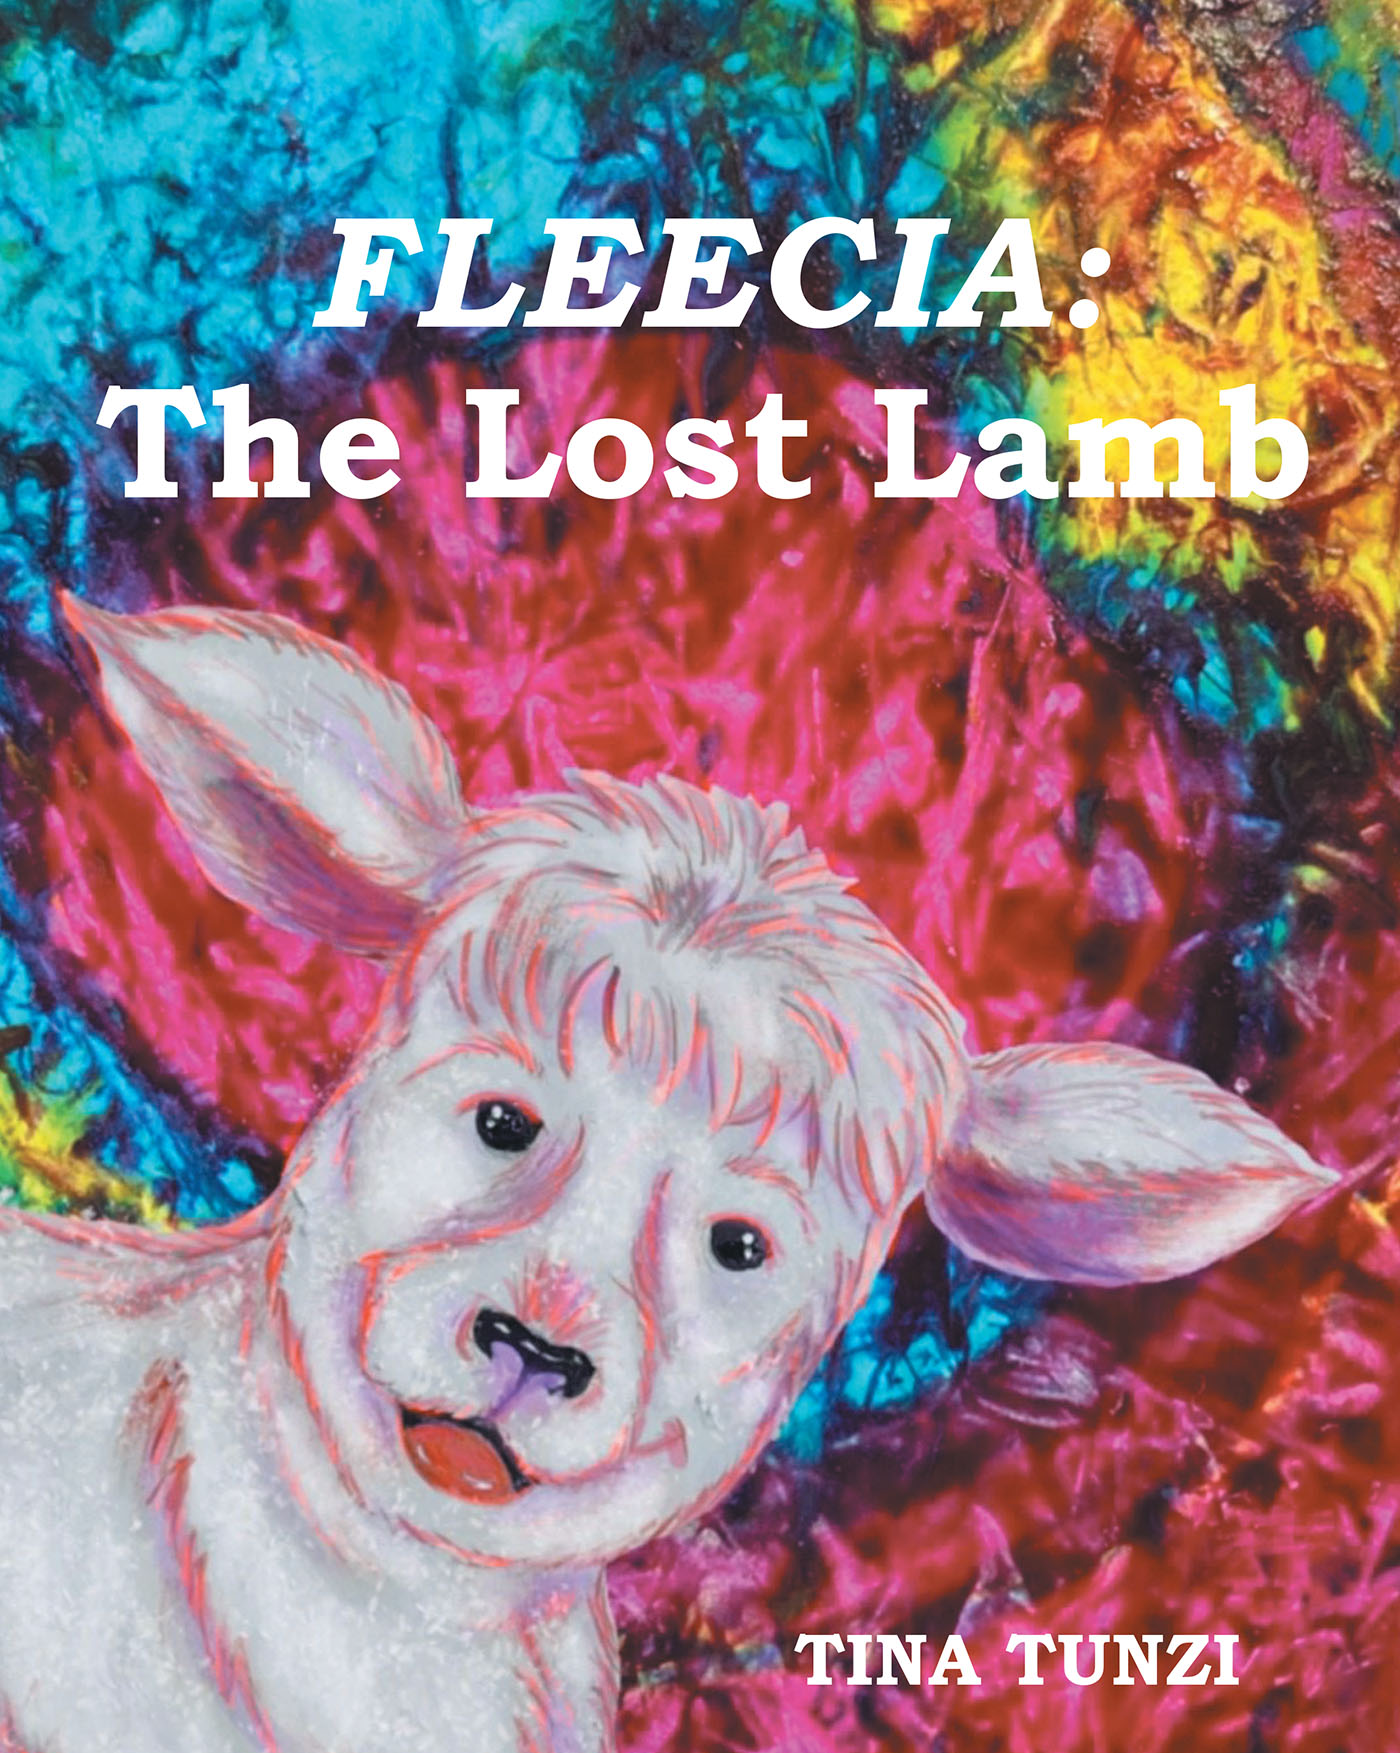 Tina Tunzi’s Newly Released “FLEECIA: The Lost Lamb” is a Charming Story of a Lost Lamb and Important Lessons of Faith